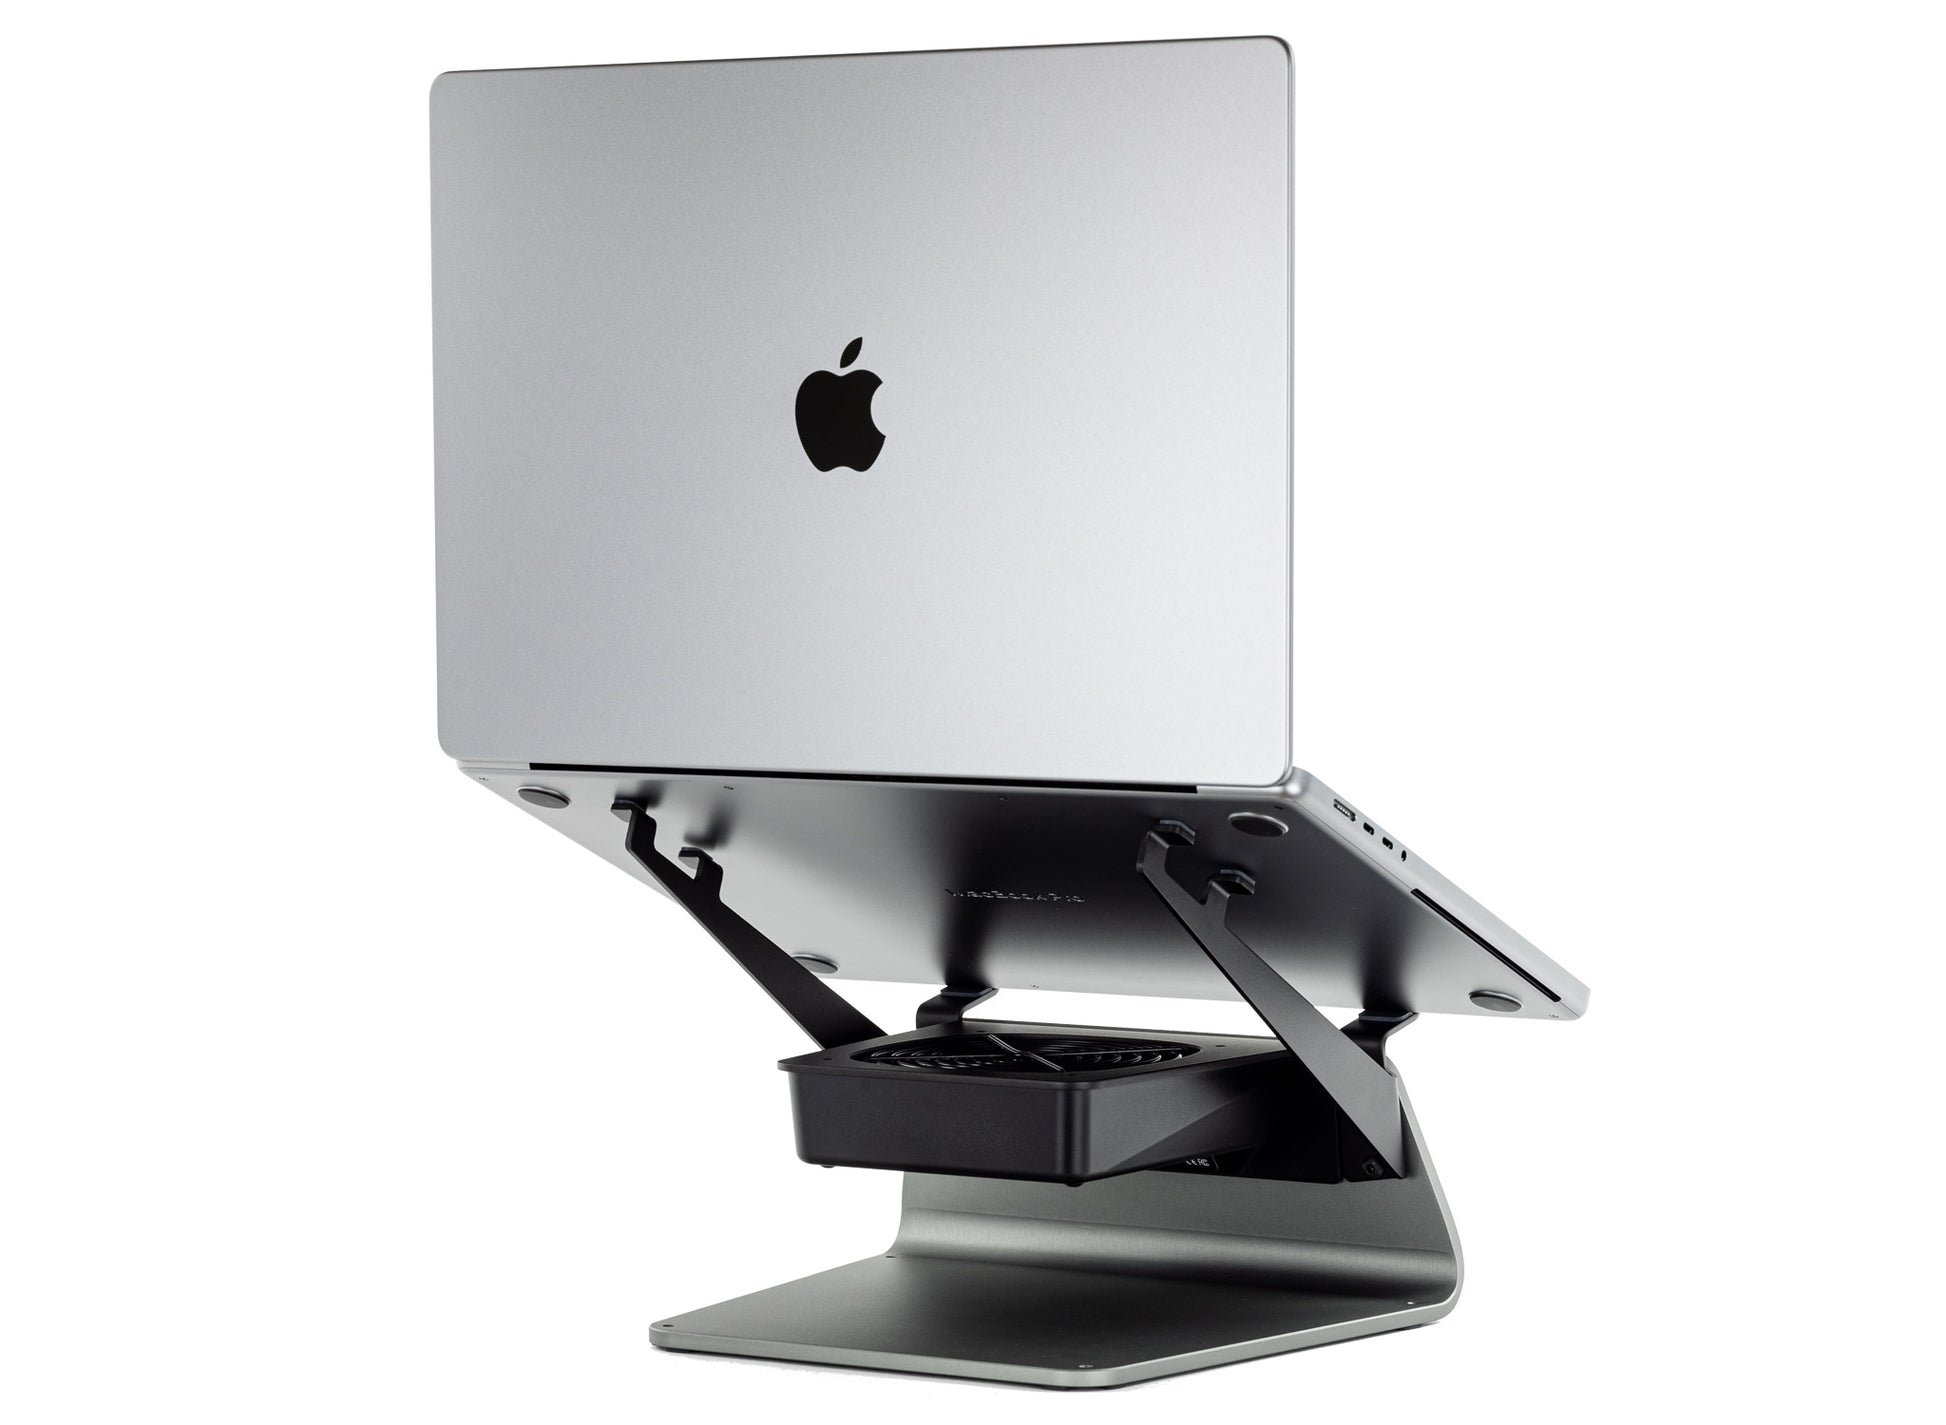 SVALT Cooling Stand model SxB14 gray back side view for quiet fan cooling performance with Apple laptop 16-inch MacBook Pro M1 Max